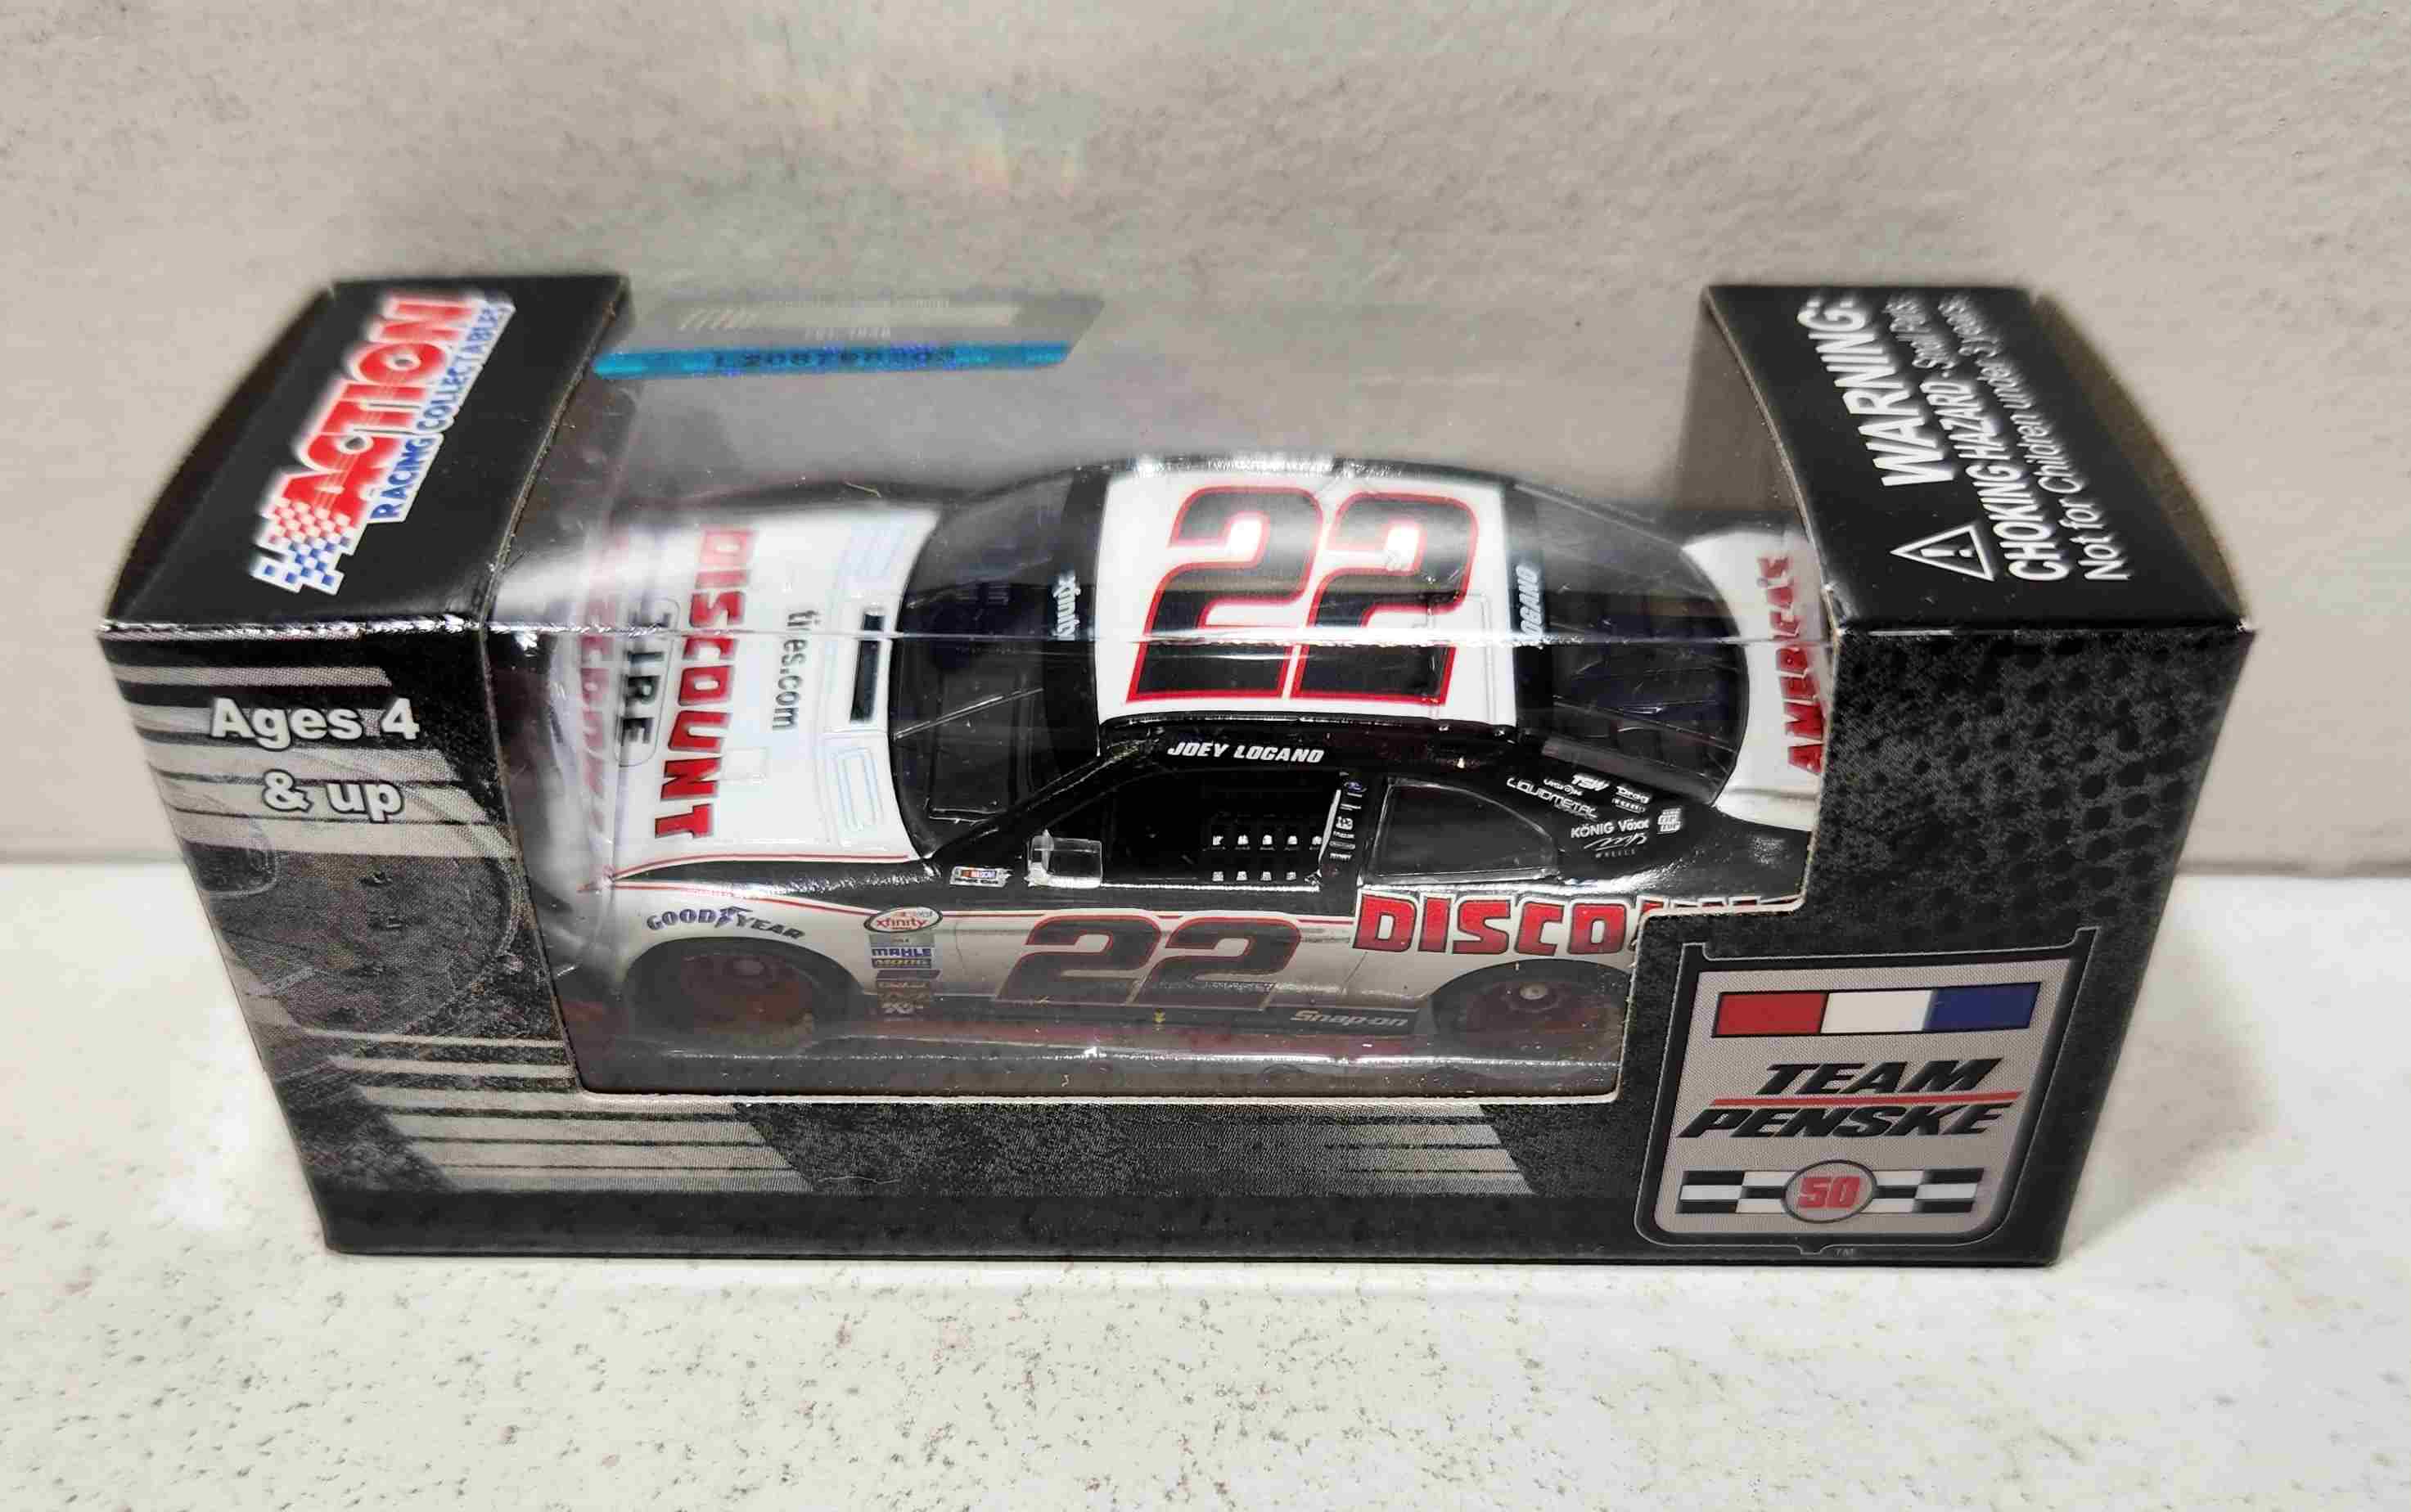 2016 Joey Logano 1/64th Discount Tire "Xfinity Series" Pitstop Series Mustang